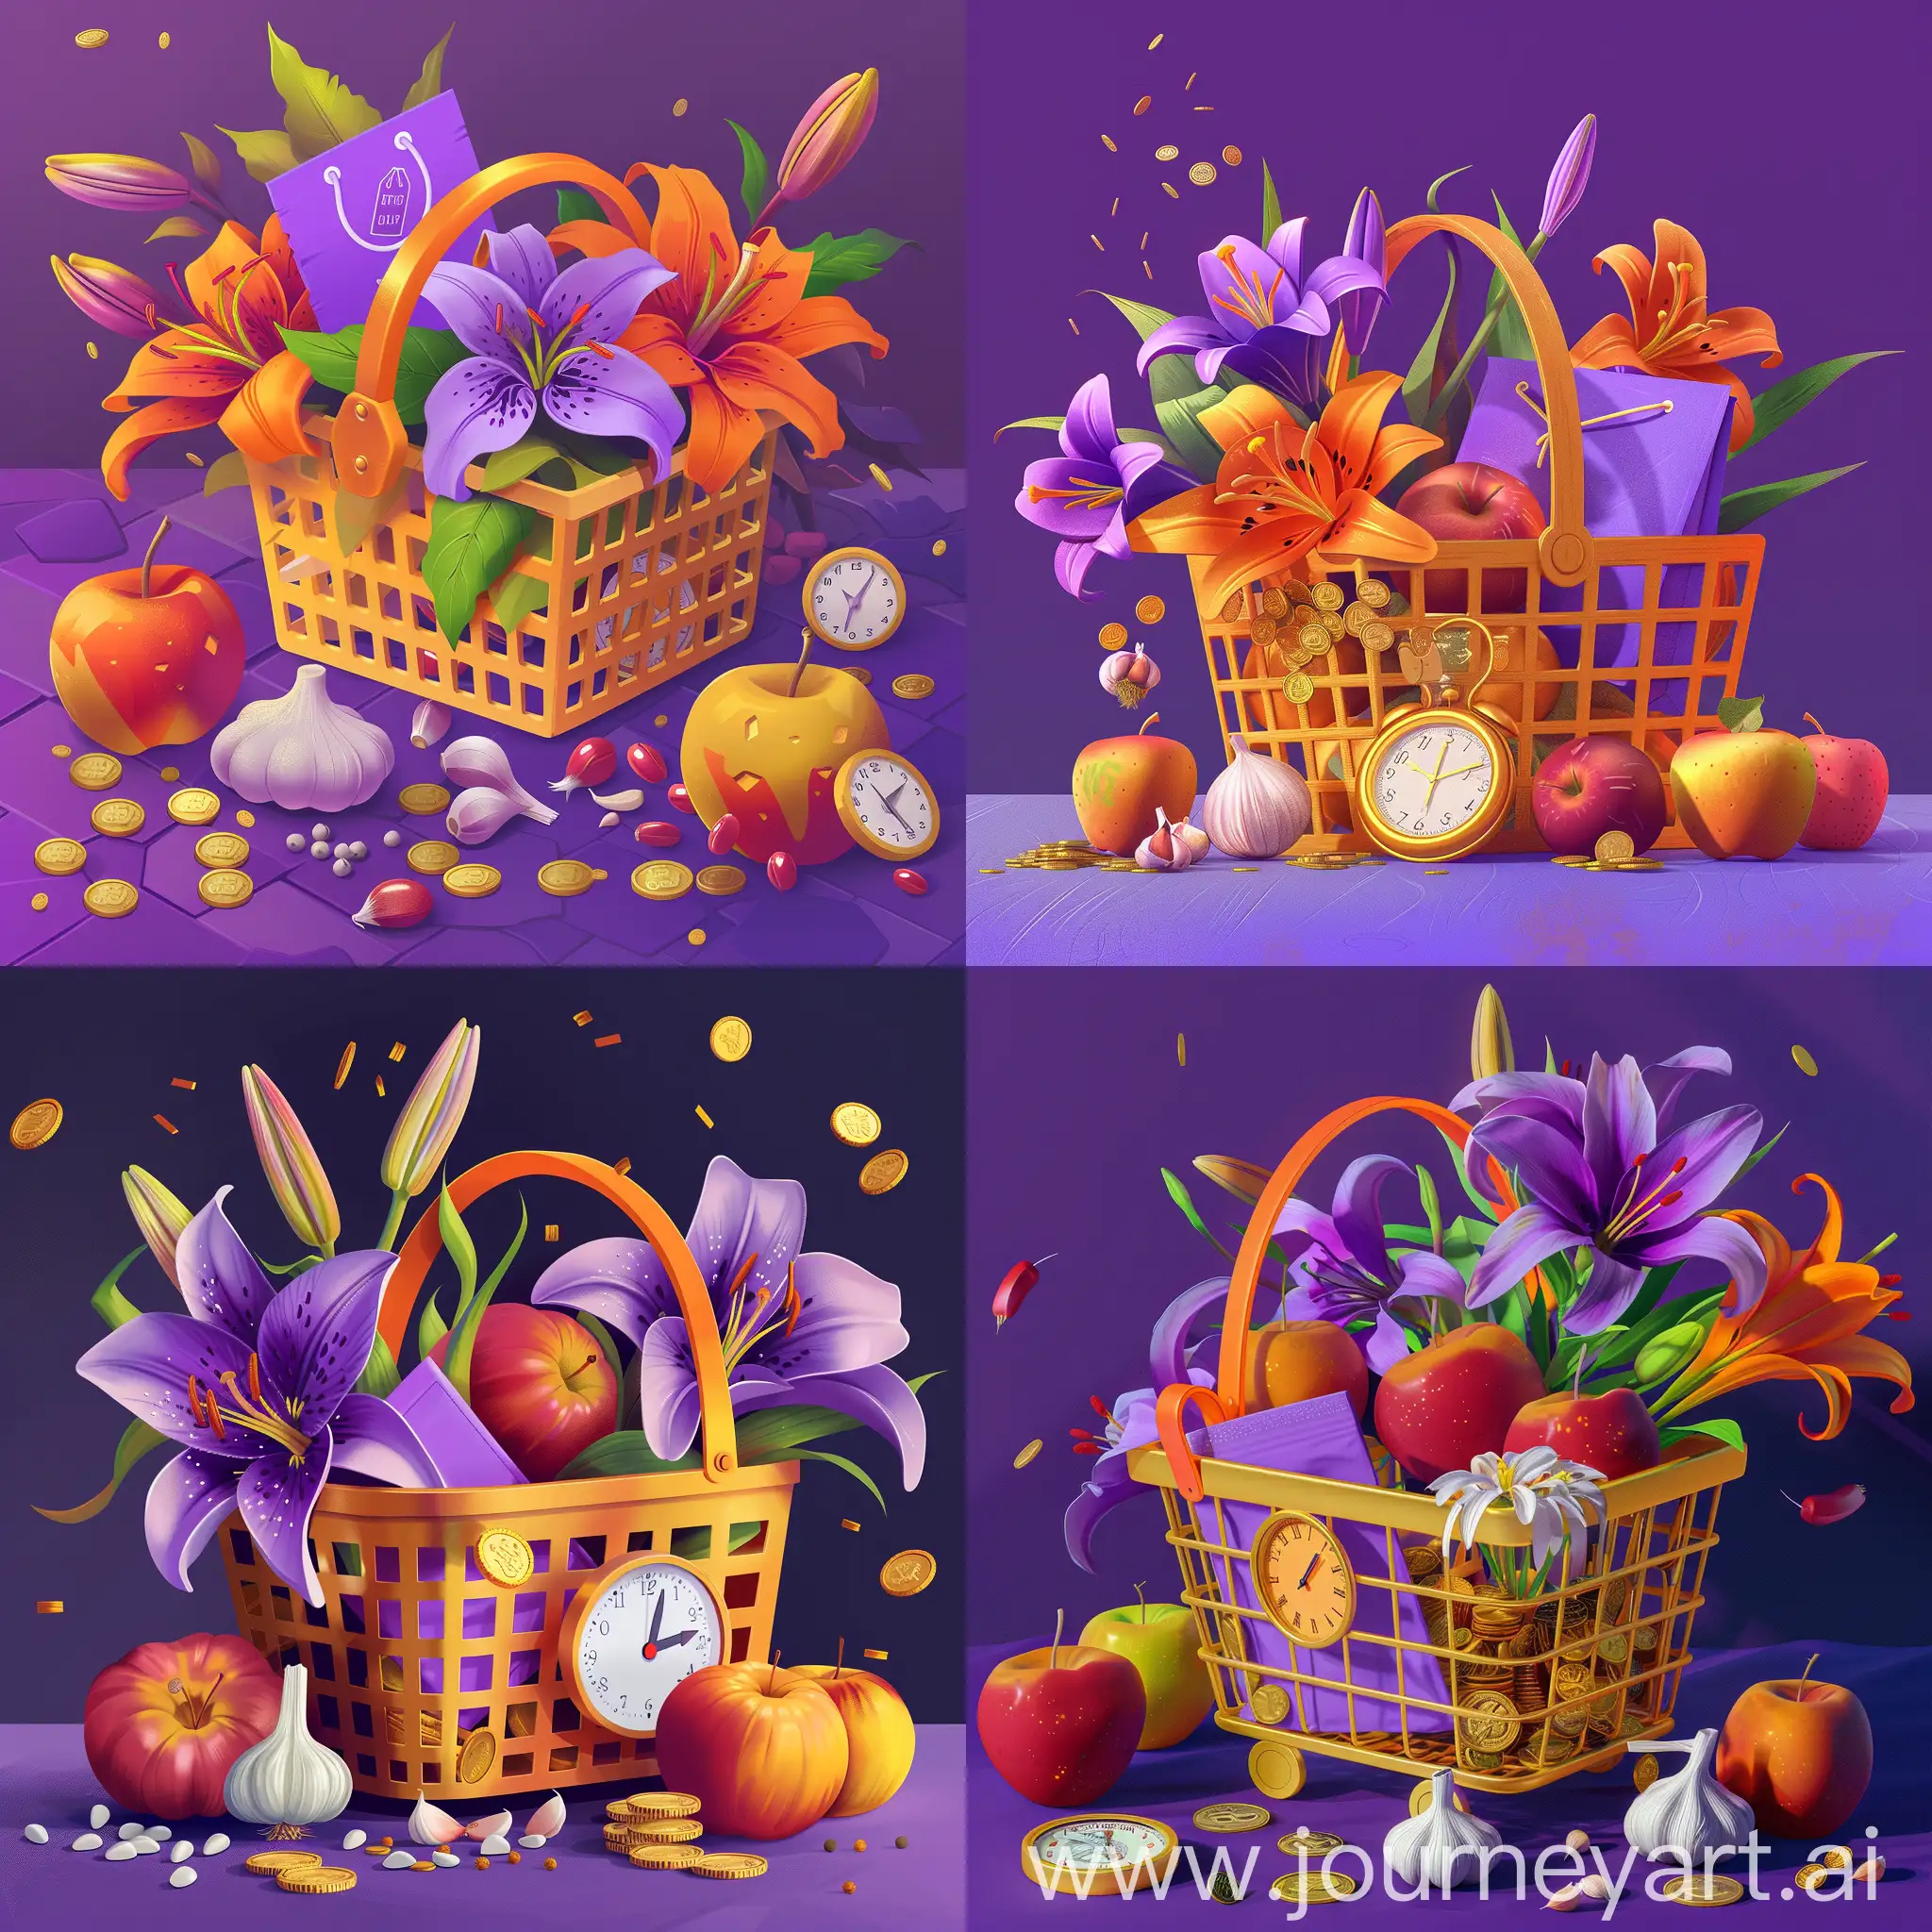 Vibrant-Purple-Shopping-Table-Gold-Basket-Lilies-Apples-Garlic-and-Coins